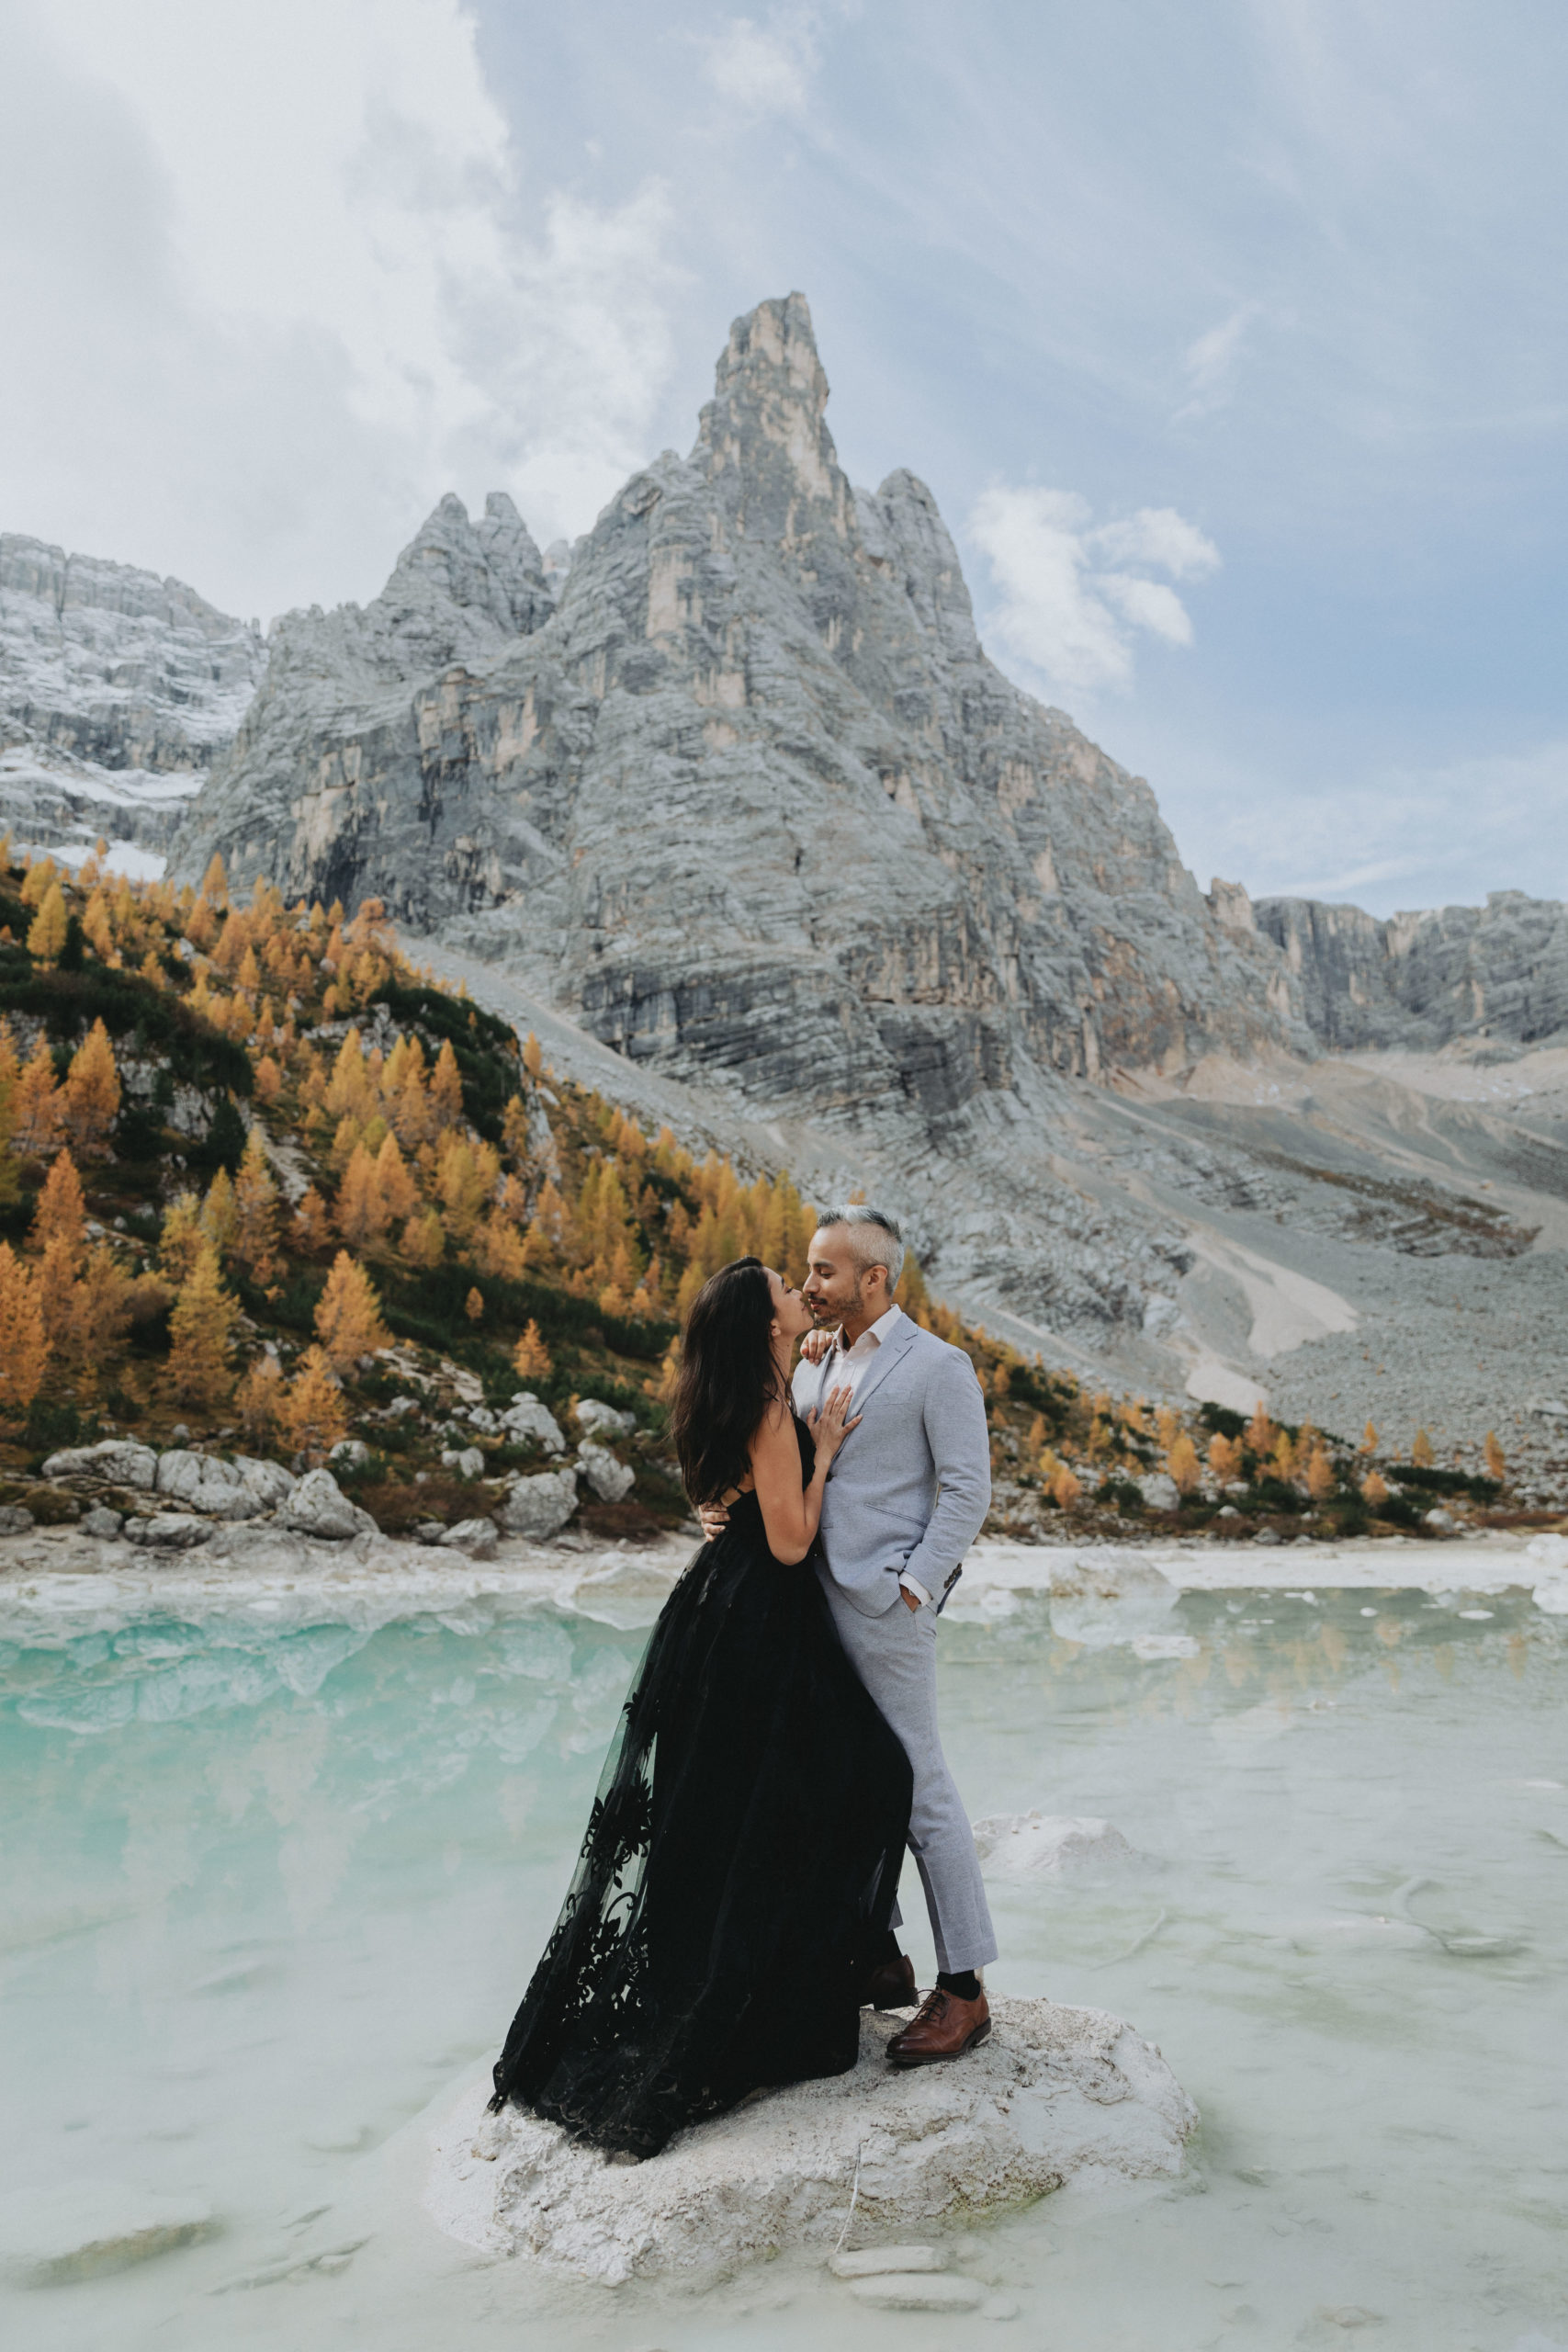 A couple embraces while wearing their wedding attire near the impressive Lago di Sorapis during their Dolomites elopement. The wife is wearing a black dress and he is wearing a light grey suit. They are standing nose to nose.